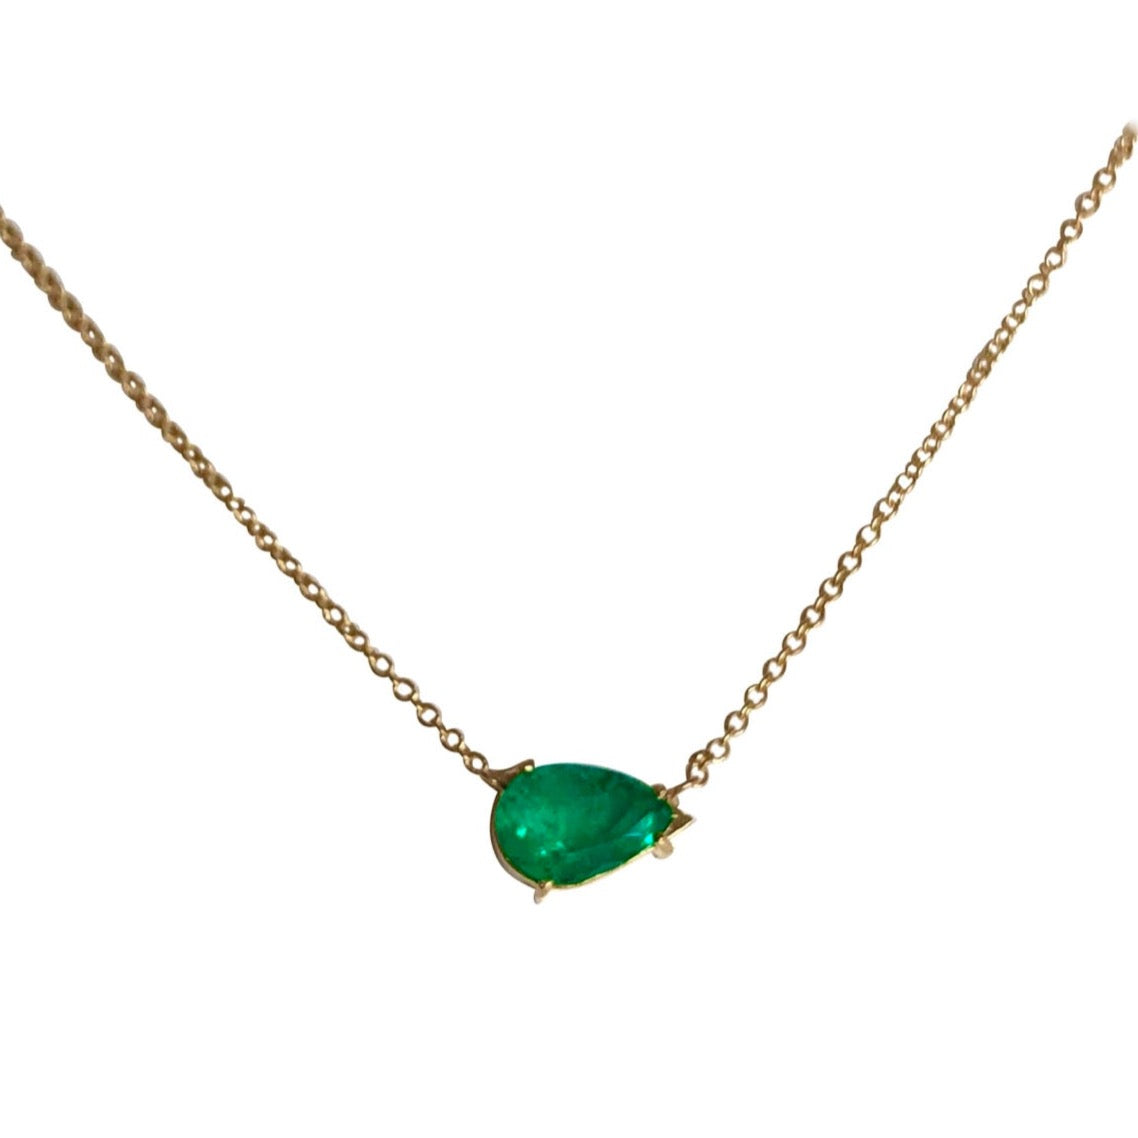 Pear Shape Colombian Emerald Solitaire Pendant Drop Necklace in 18K